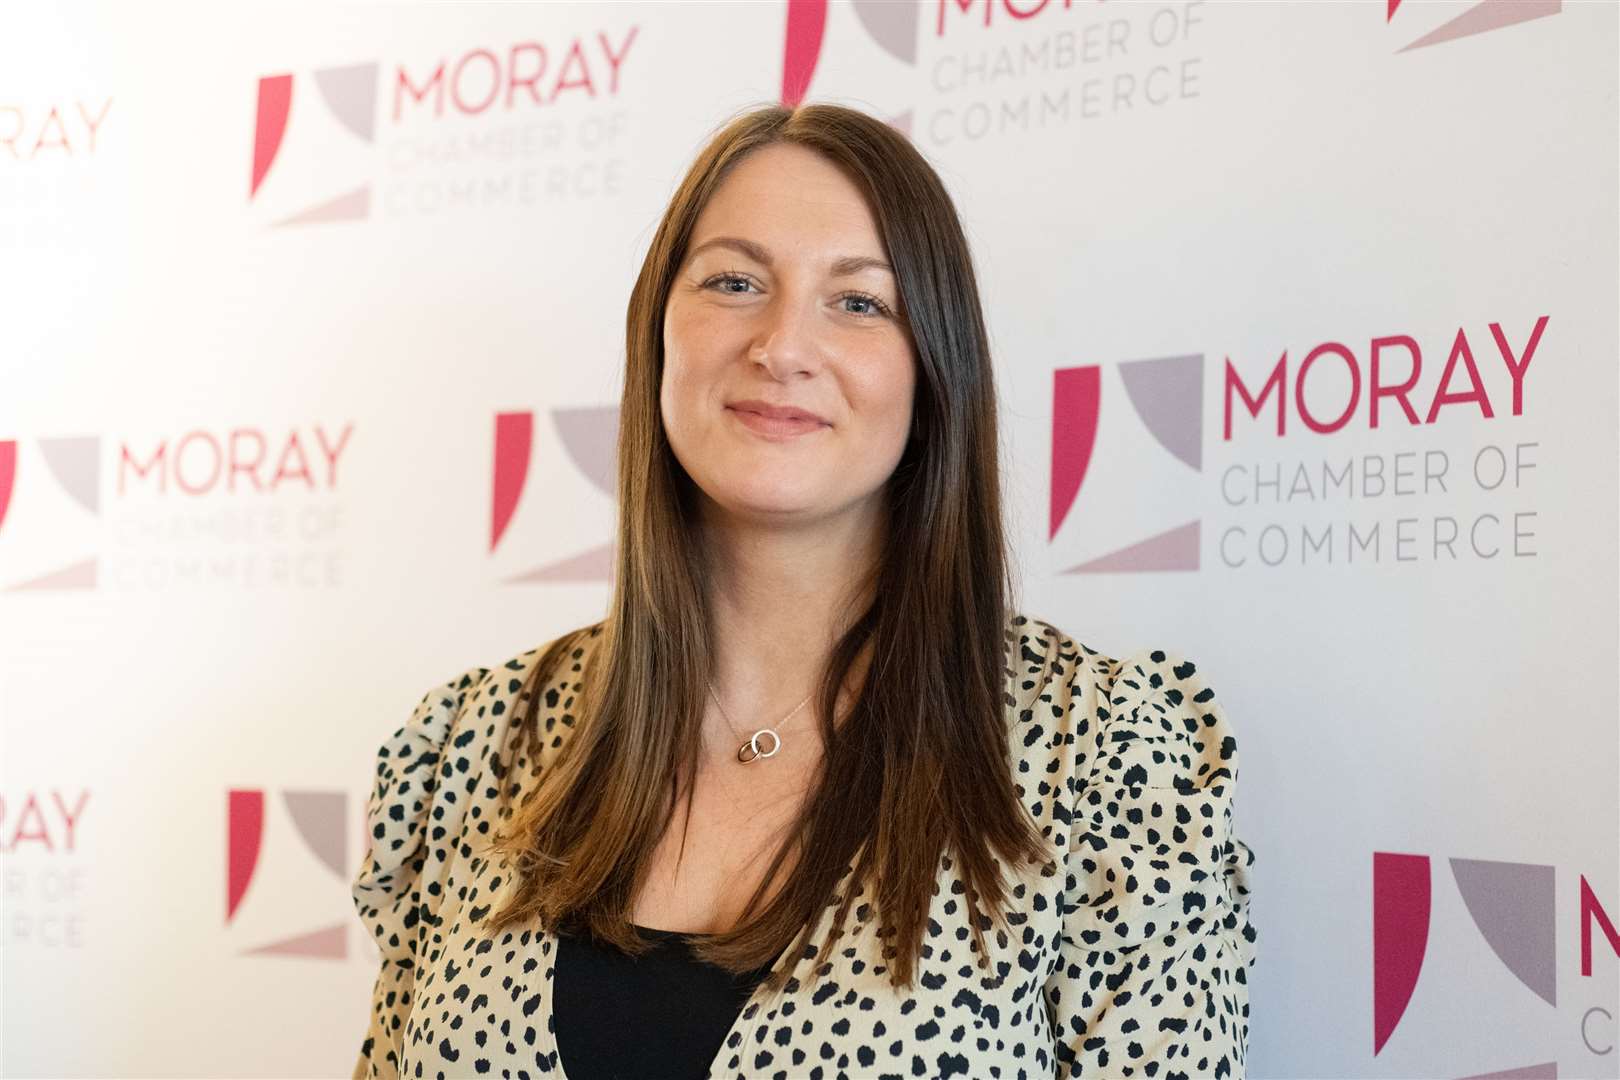 Chief Executive of Moray Chamber of Commerce Sarah Medcraf. Picture: Daniel Forsyth